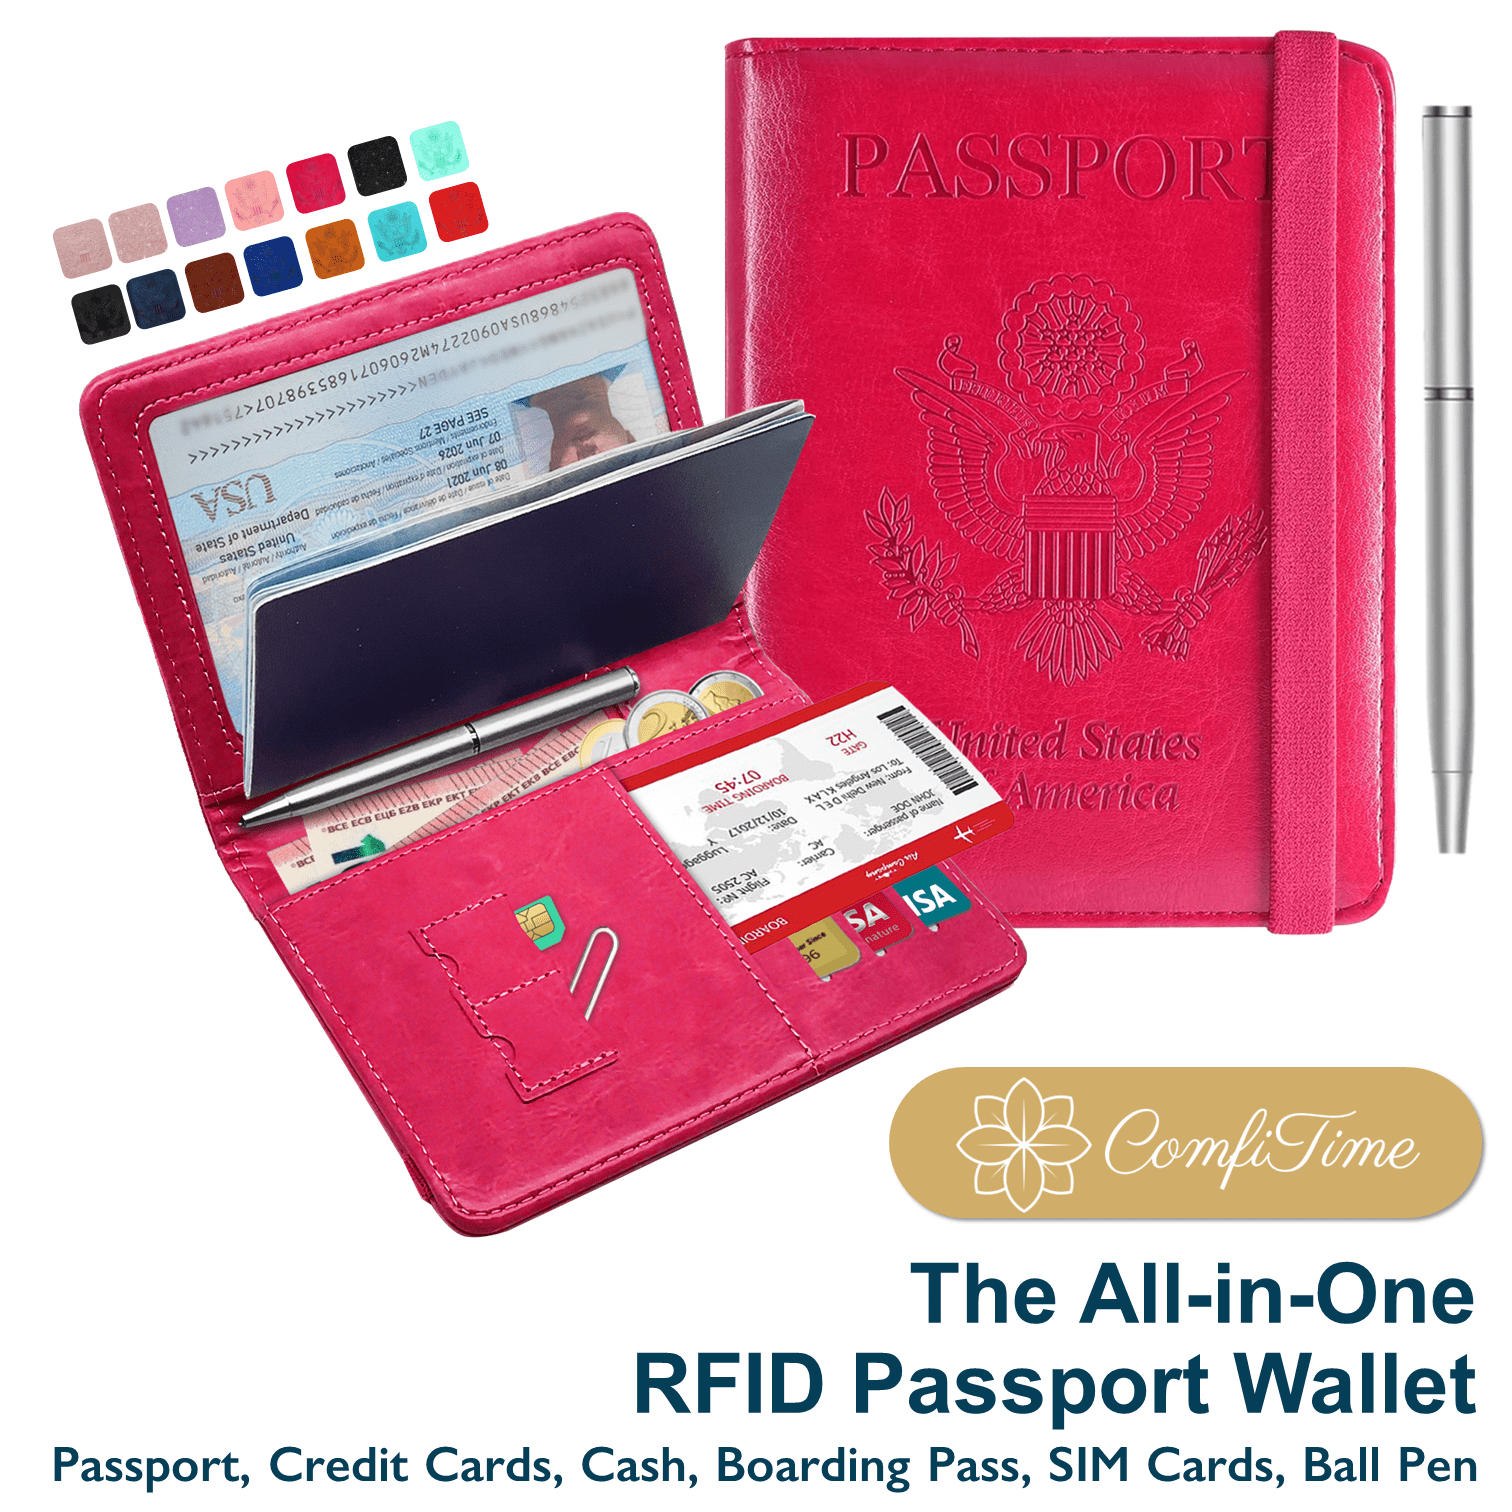 Hollywood kraam Tekstschrijver ComfiTime Passport and Vaccine Card Holder, Waterproof PU Leather Passport  Holder with Vaccine Card Slot, RFID Blocking Passport Wallet Cover Case  with Vaccination Card Protector, Hot Pink - Walmart.com